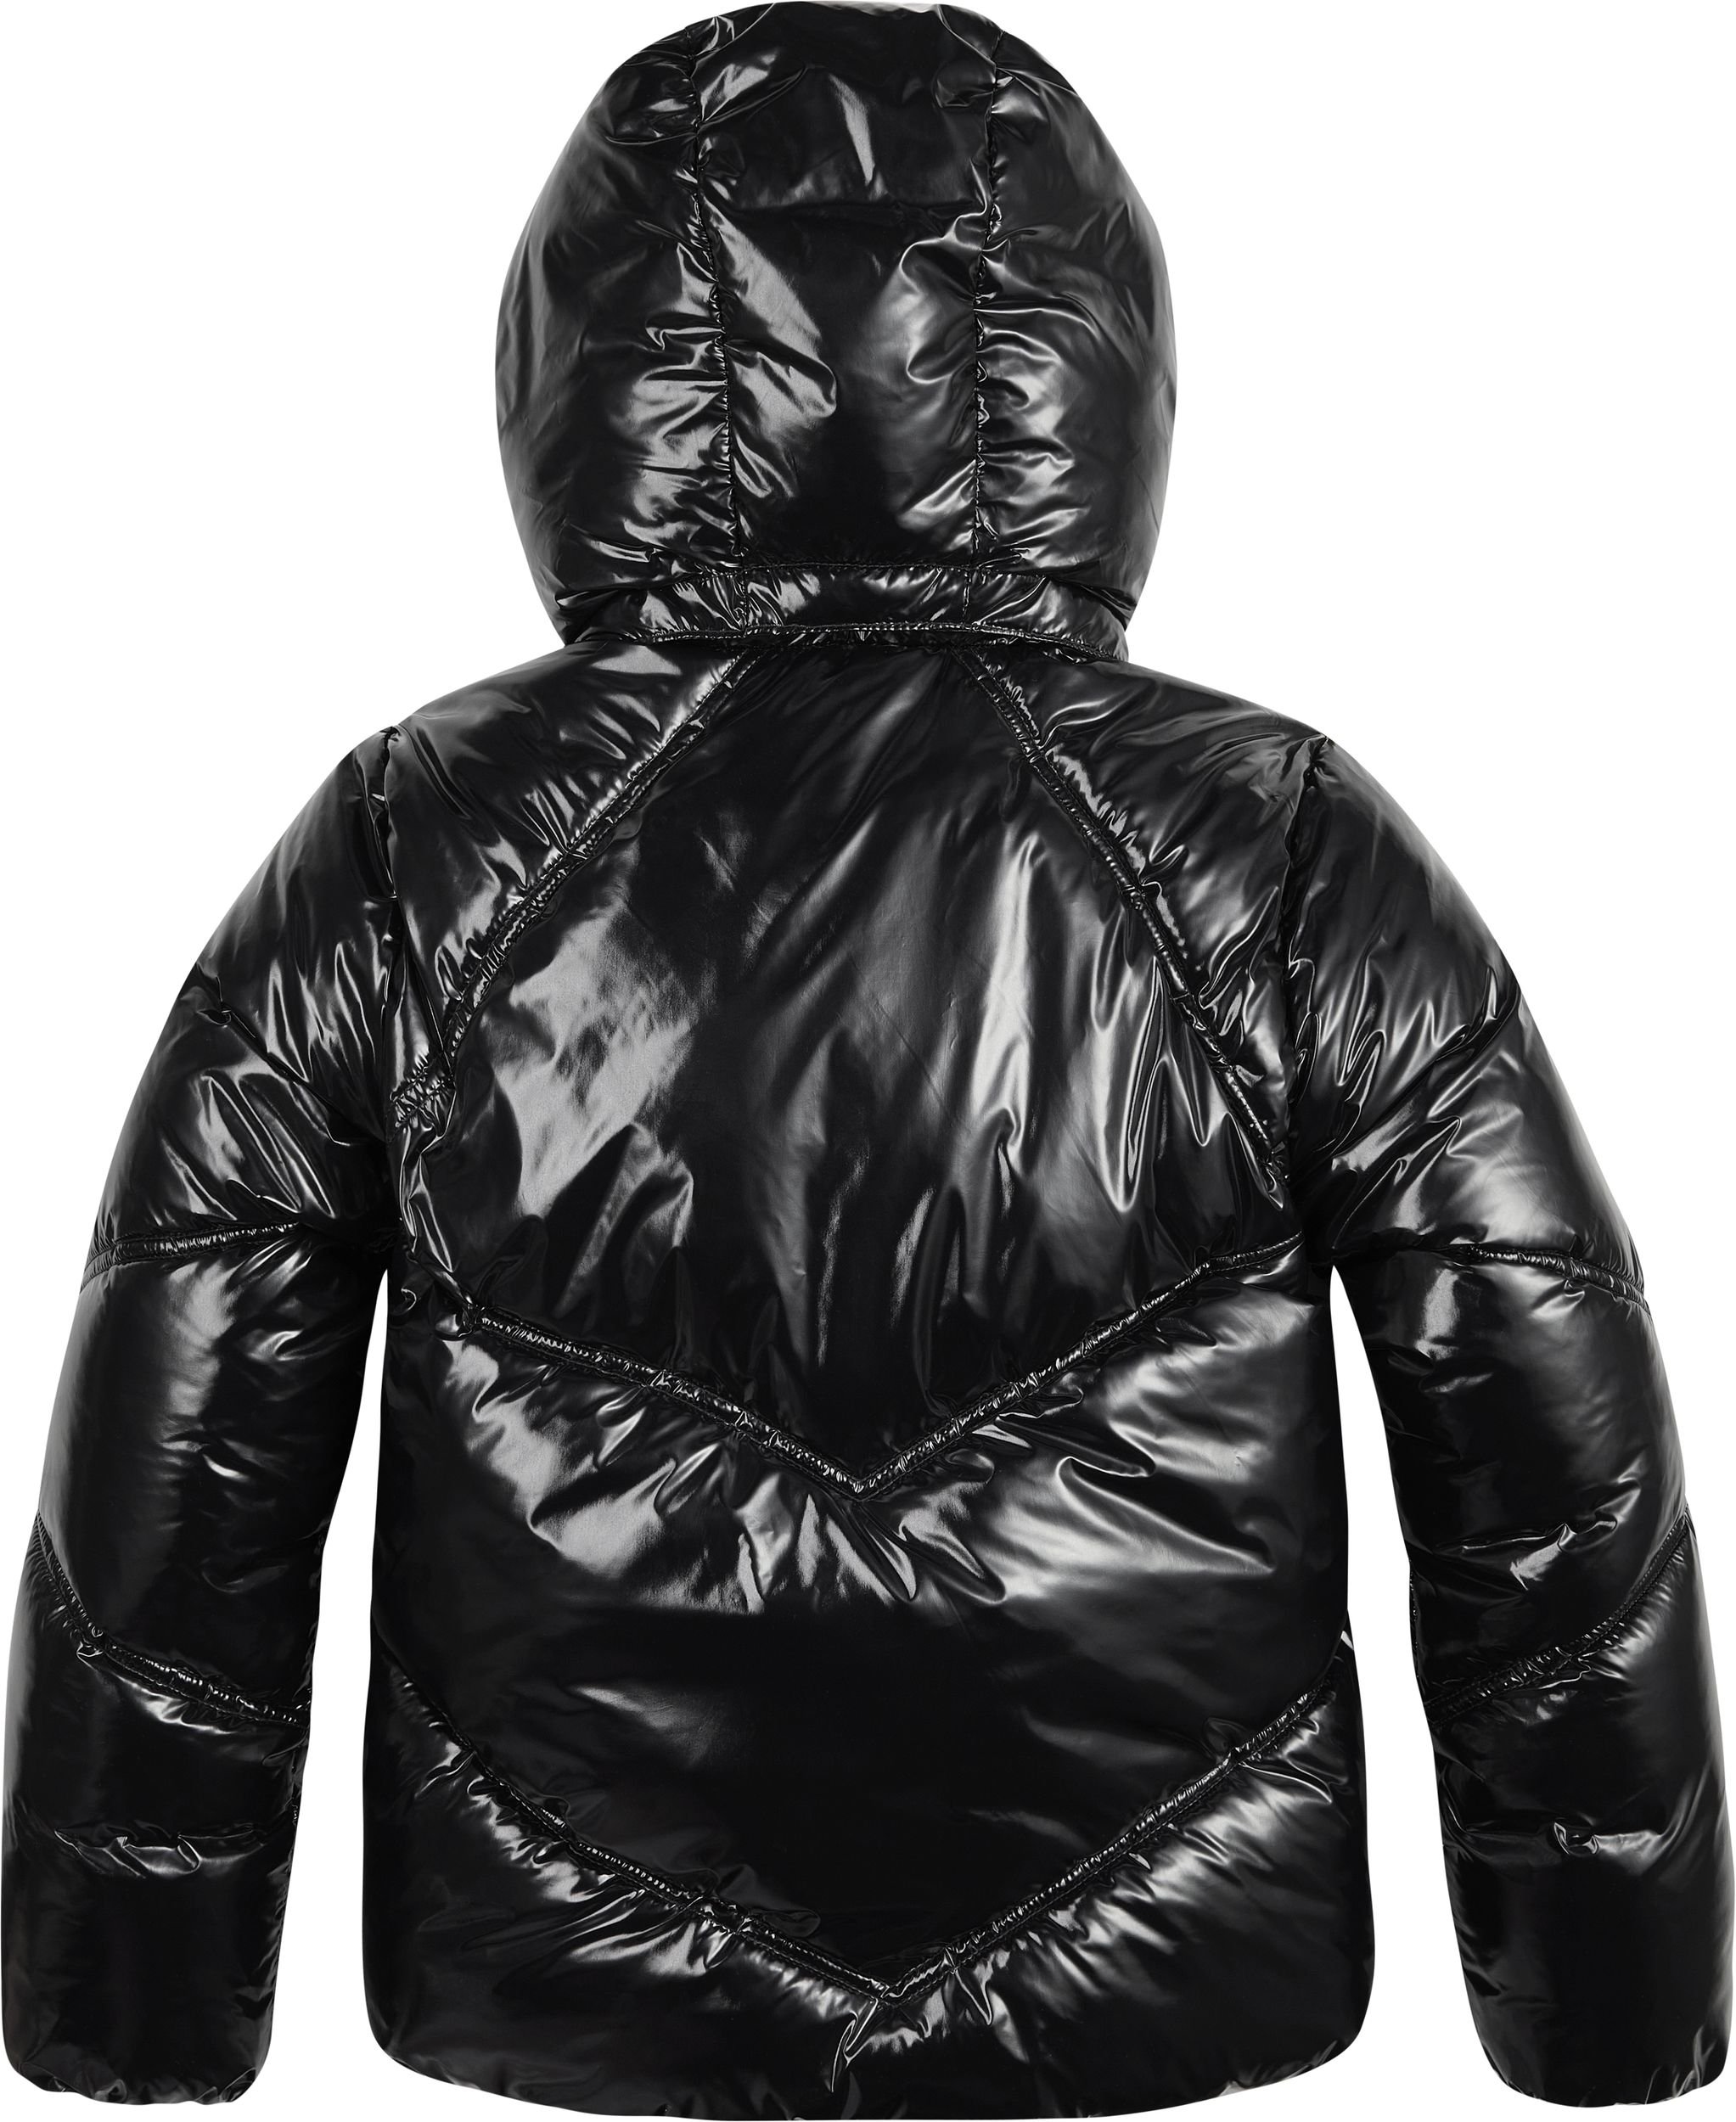 CUTS SEAMS QUILTED SHINY JACKET